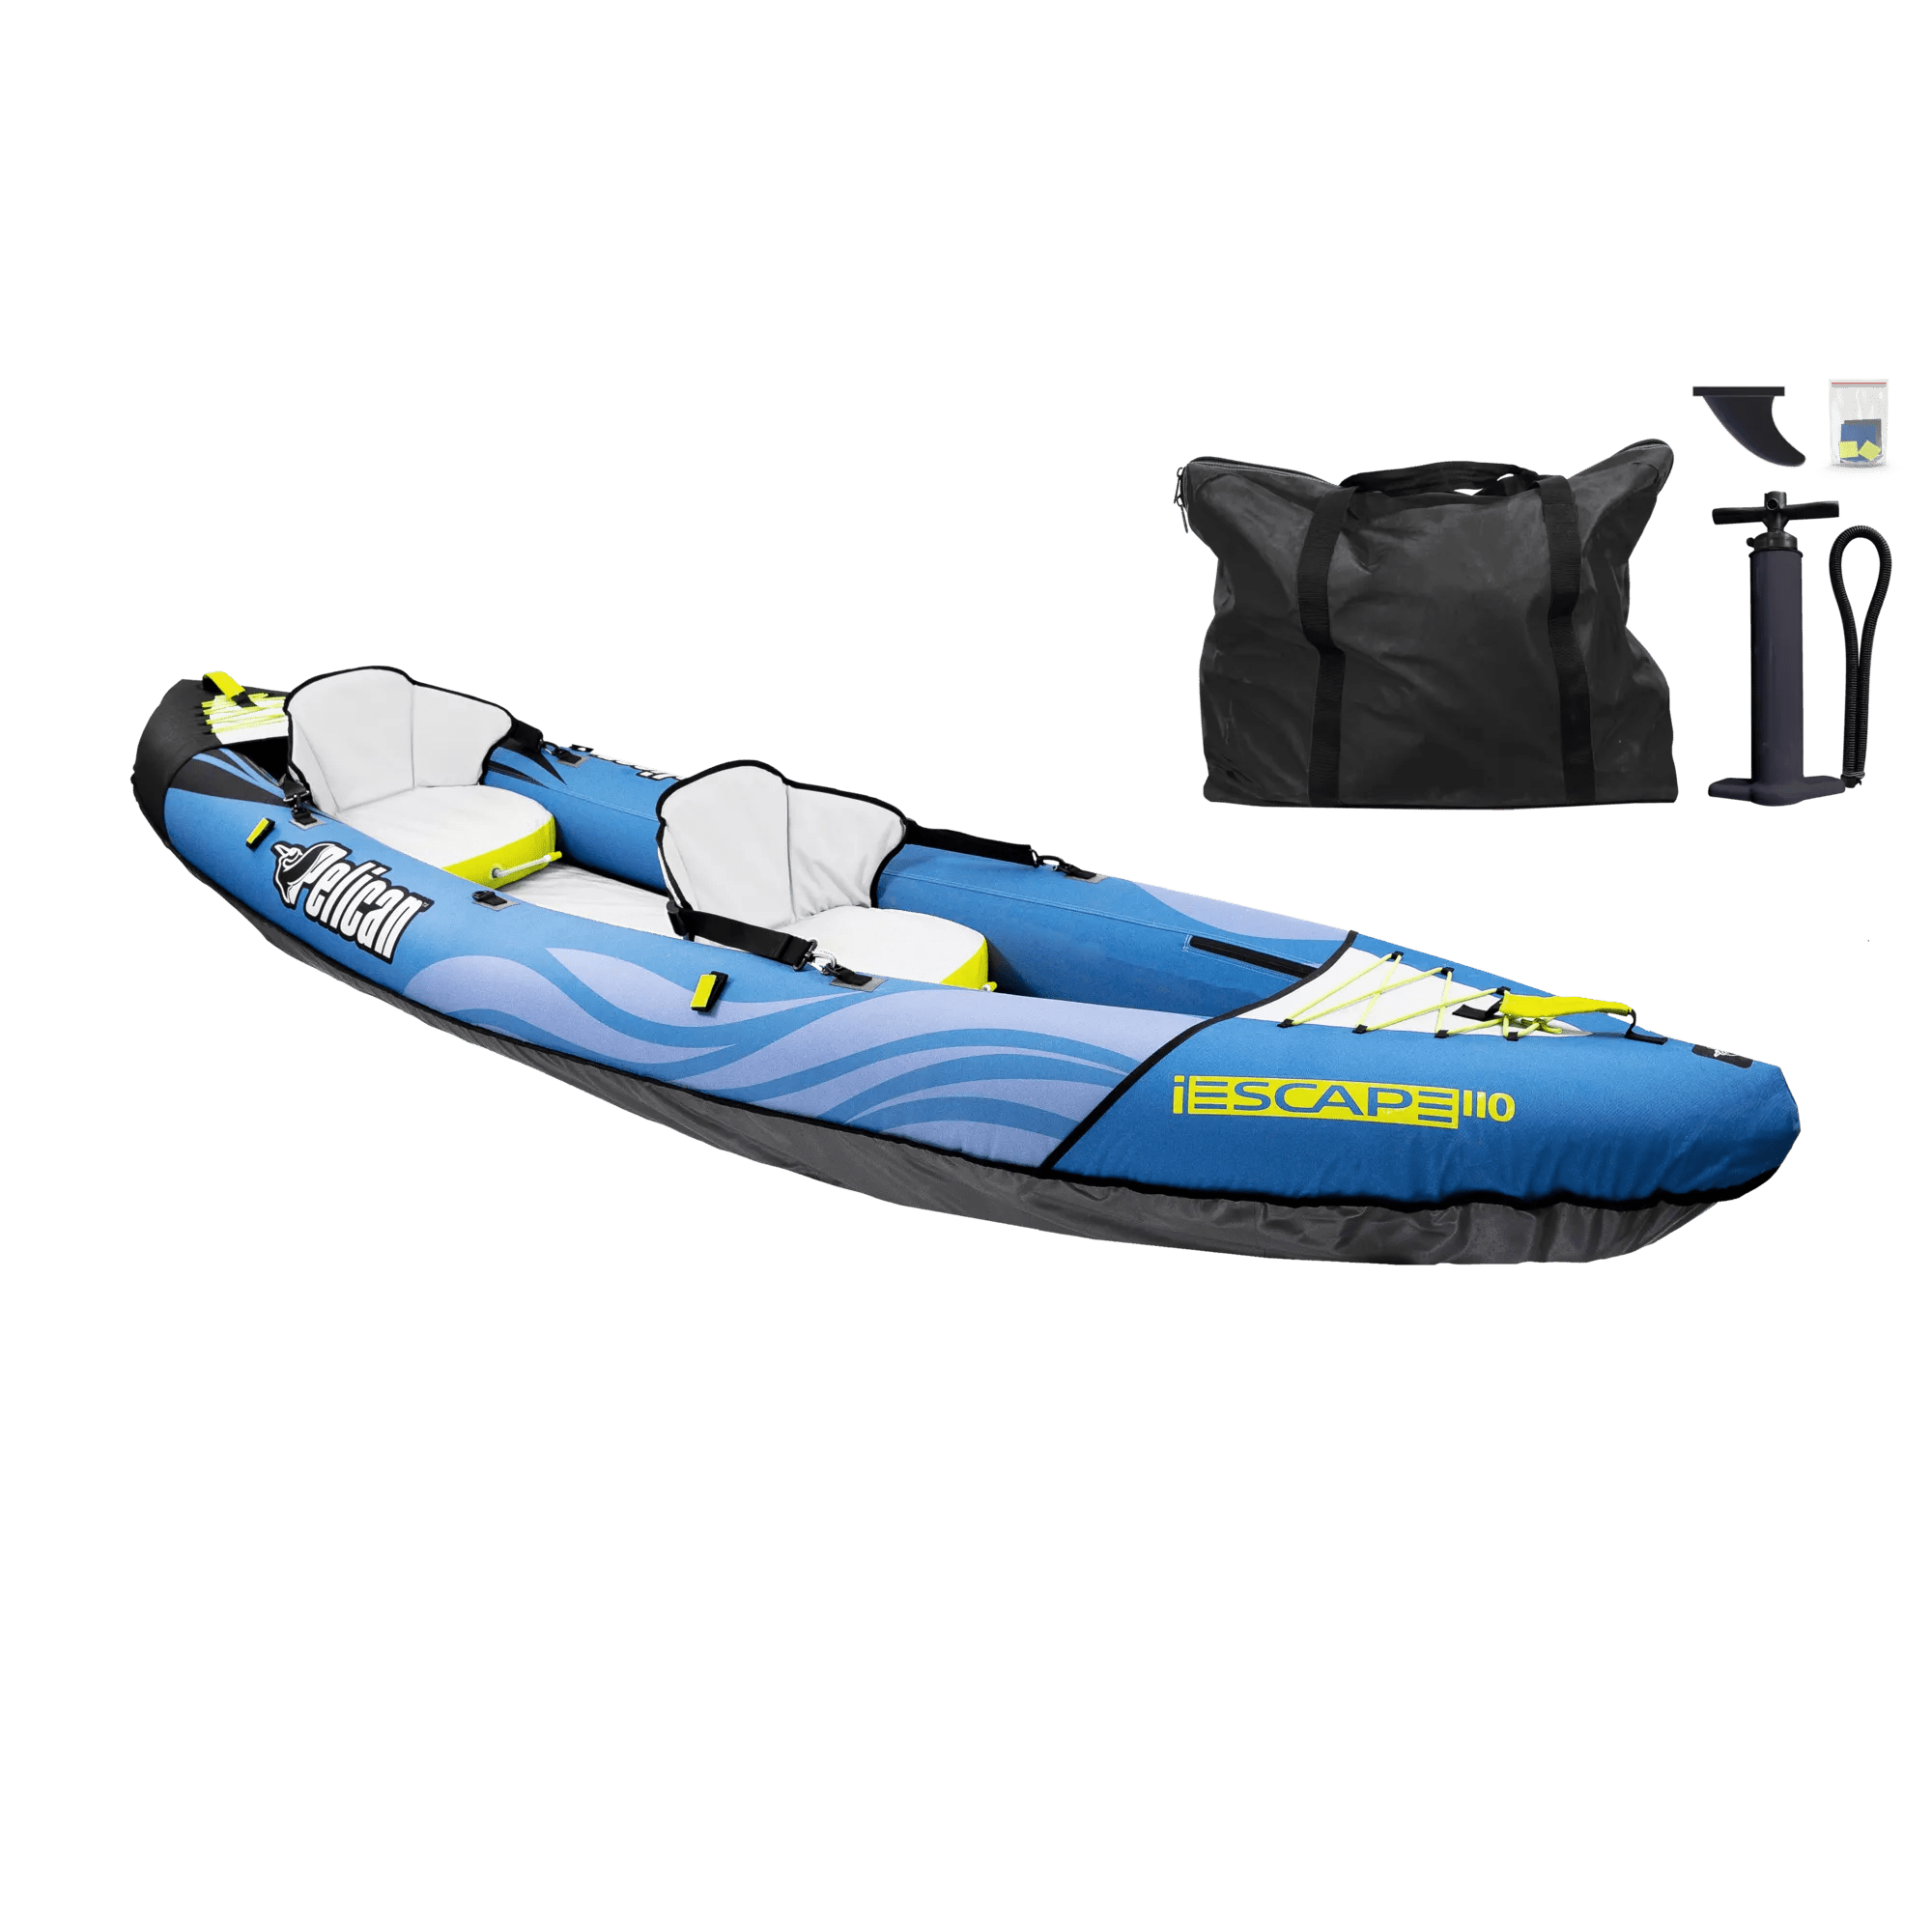 PELICAN - Convertible Inflatable Tandem Kayak iESCAPE 110 - Blue - MMG11P104 - ISO 